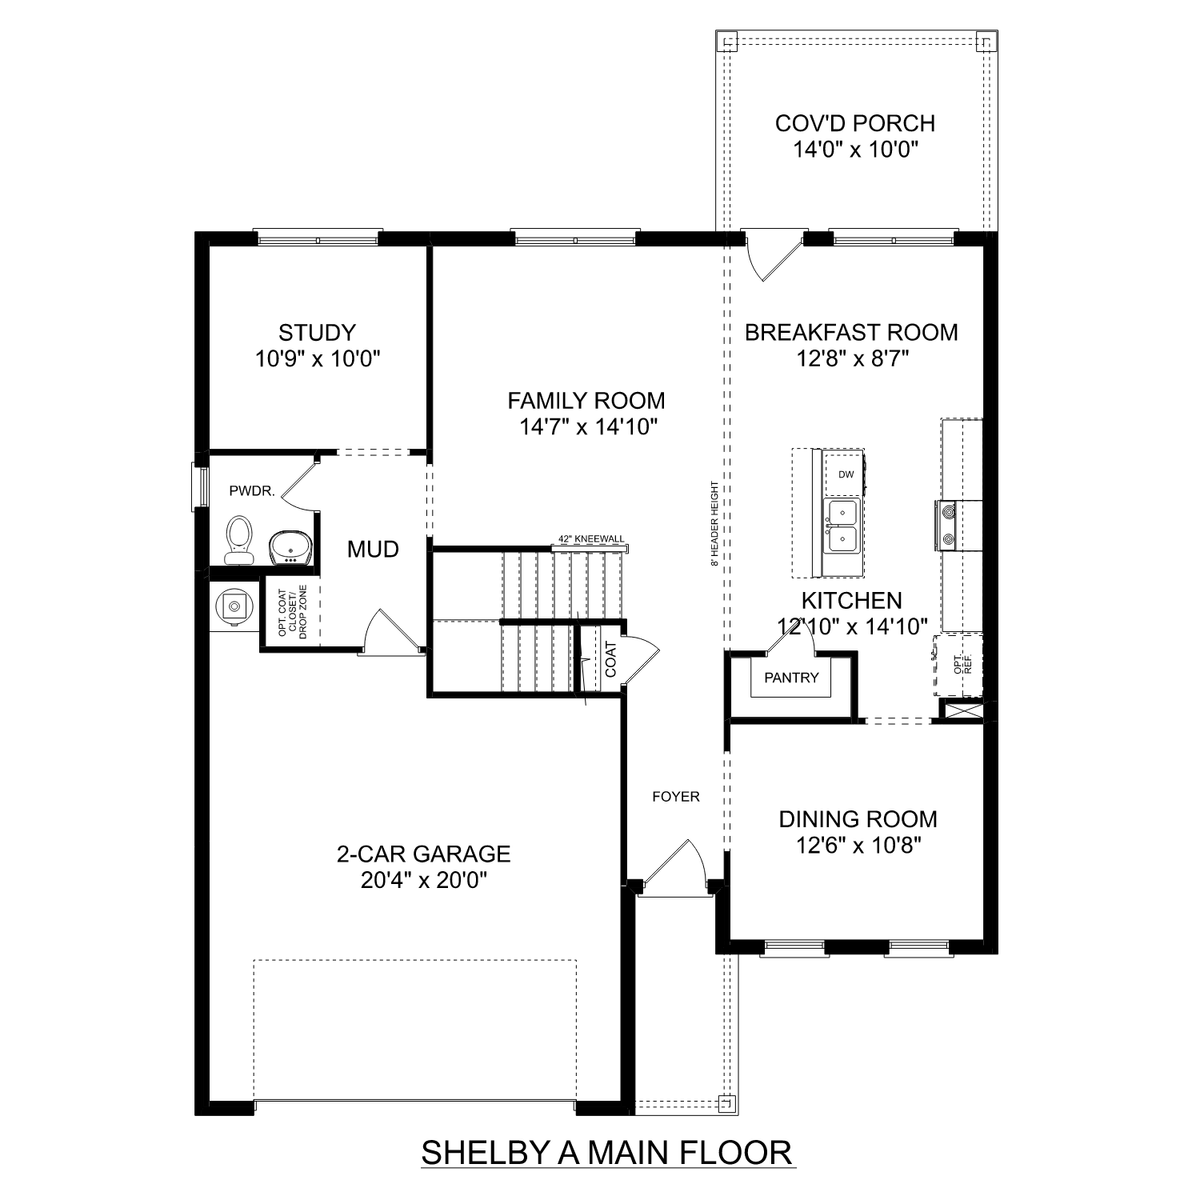 1 - The Shelby A buildable floor plan layout in Davidson Homes' Clearview community.